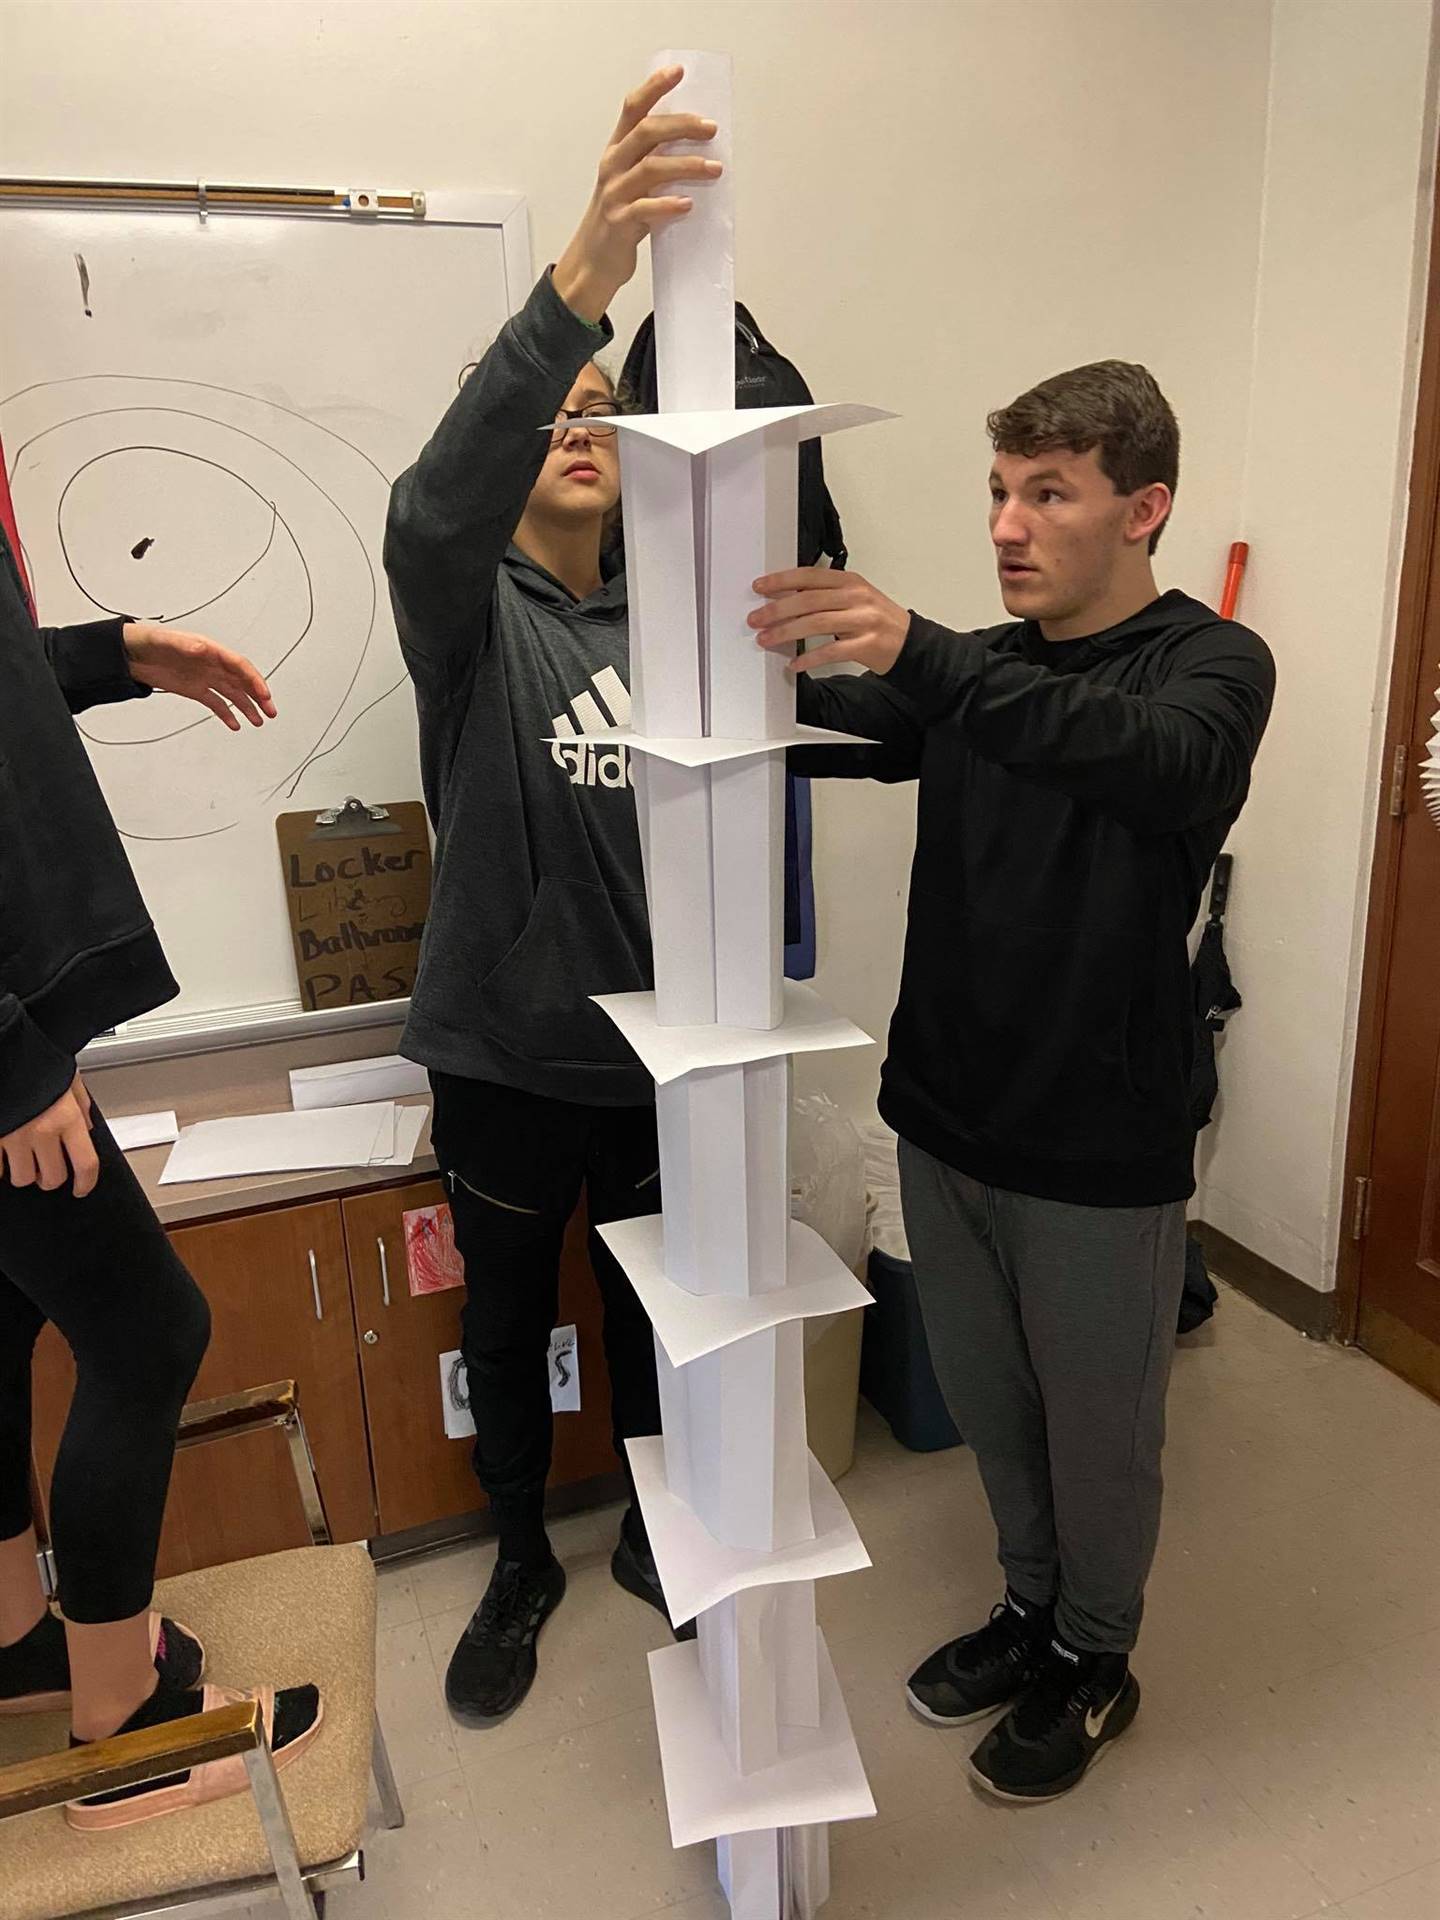 Tower Building Team exercise